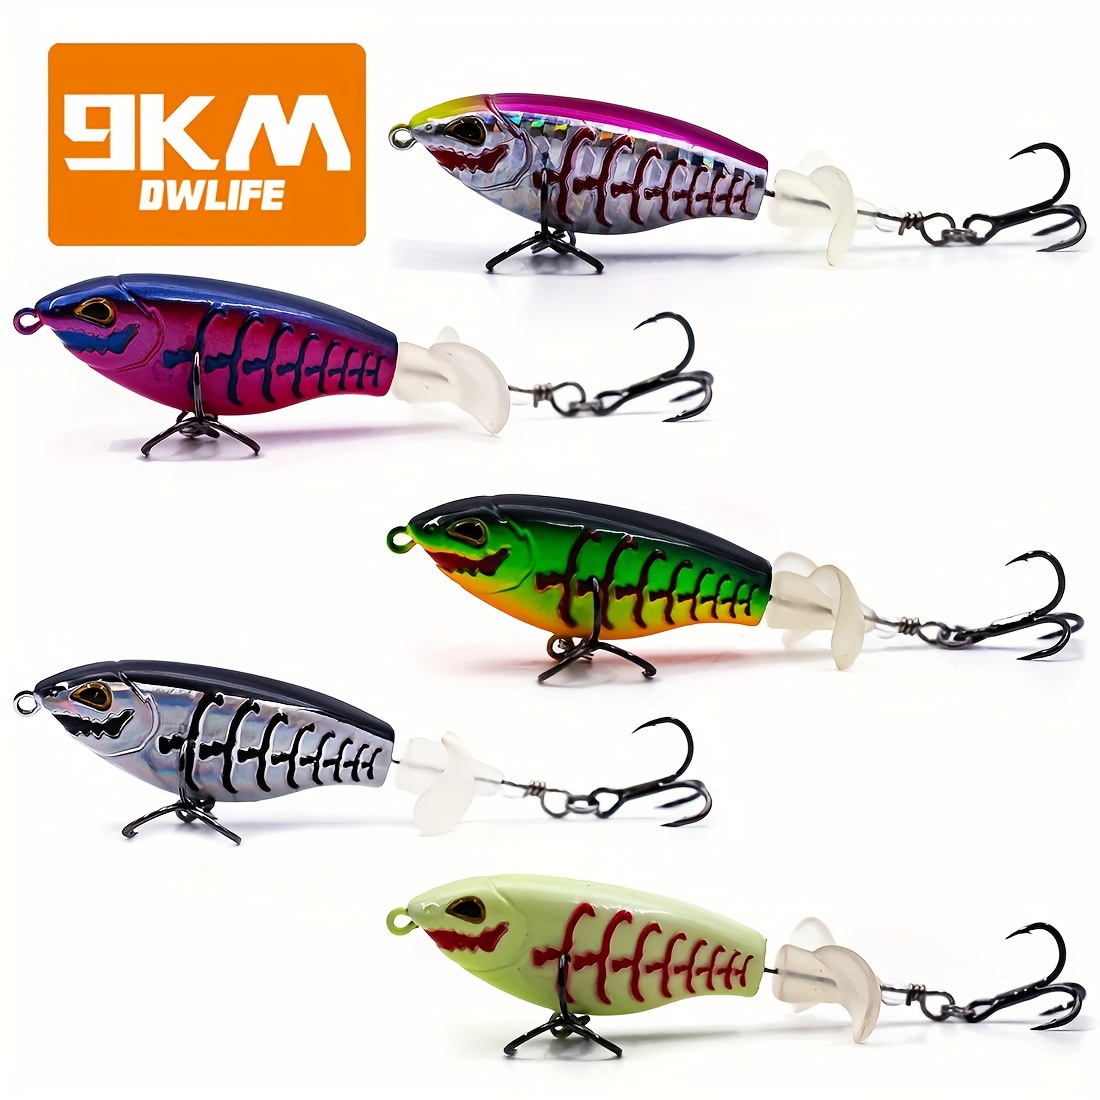 9km Topwater Fishing Lures For Bass, Popper Lure With 3d Eyes And